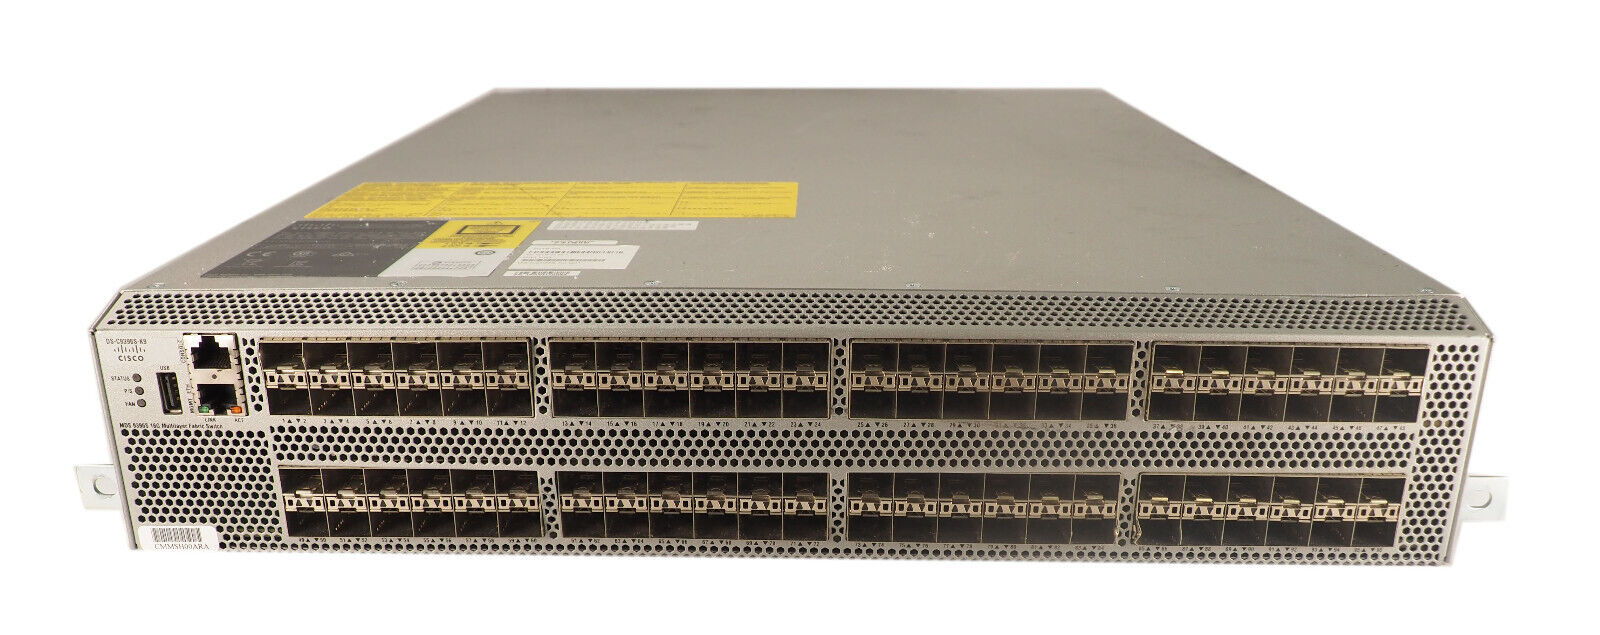 CISCO MDS 9396S DS-C9396S-K9 96 SFP Port Multilayer Fabric Switch 